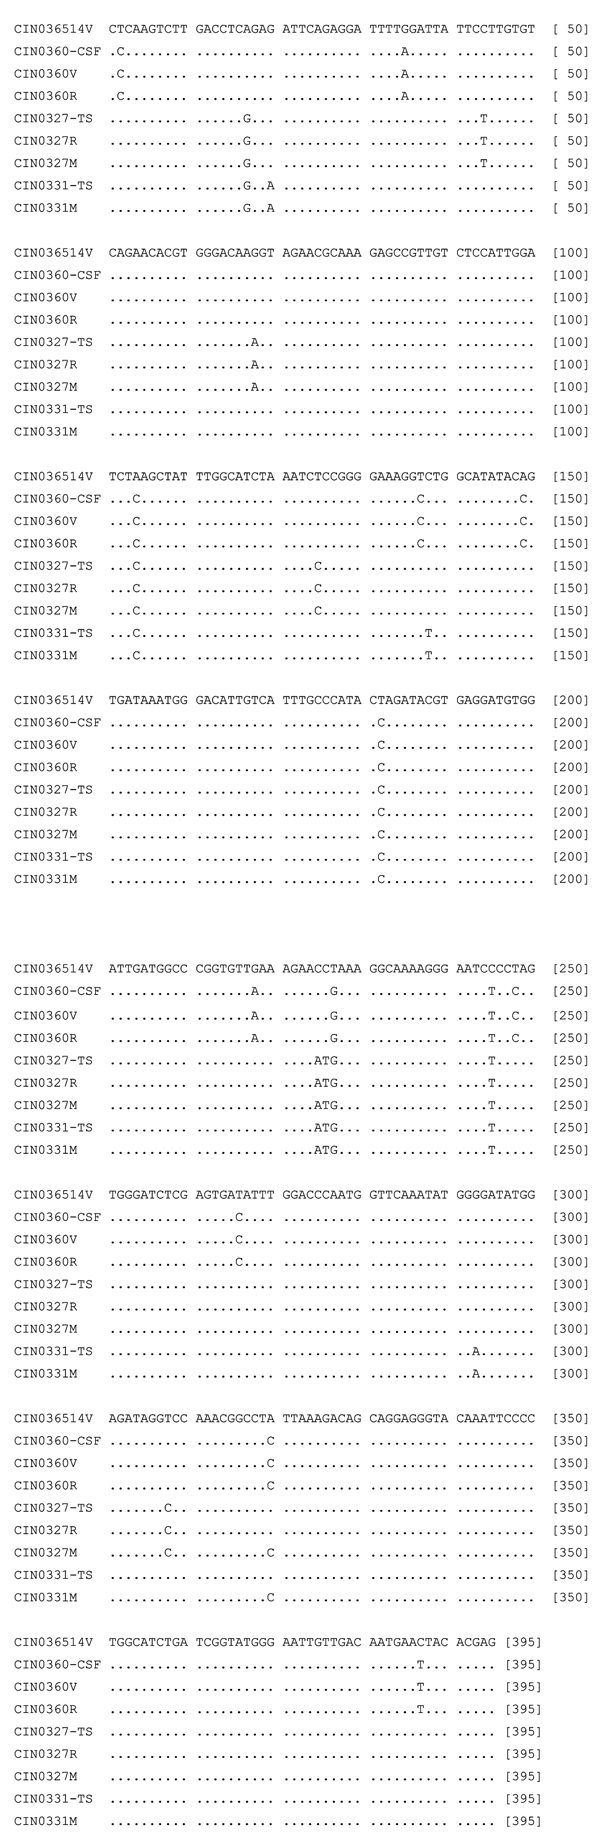 Partial G gene nucleotide sequence alignment of 3 Chandipura viruses (CHPV) isolated during the outbreak along with the corresponding sequence derived from the clinical samples. For details on isolates, see Table 1. GenBank accession numbers for the sequences derived from clinical specimens and published earlier (1) are AY554407, AY554409, and AY554411.